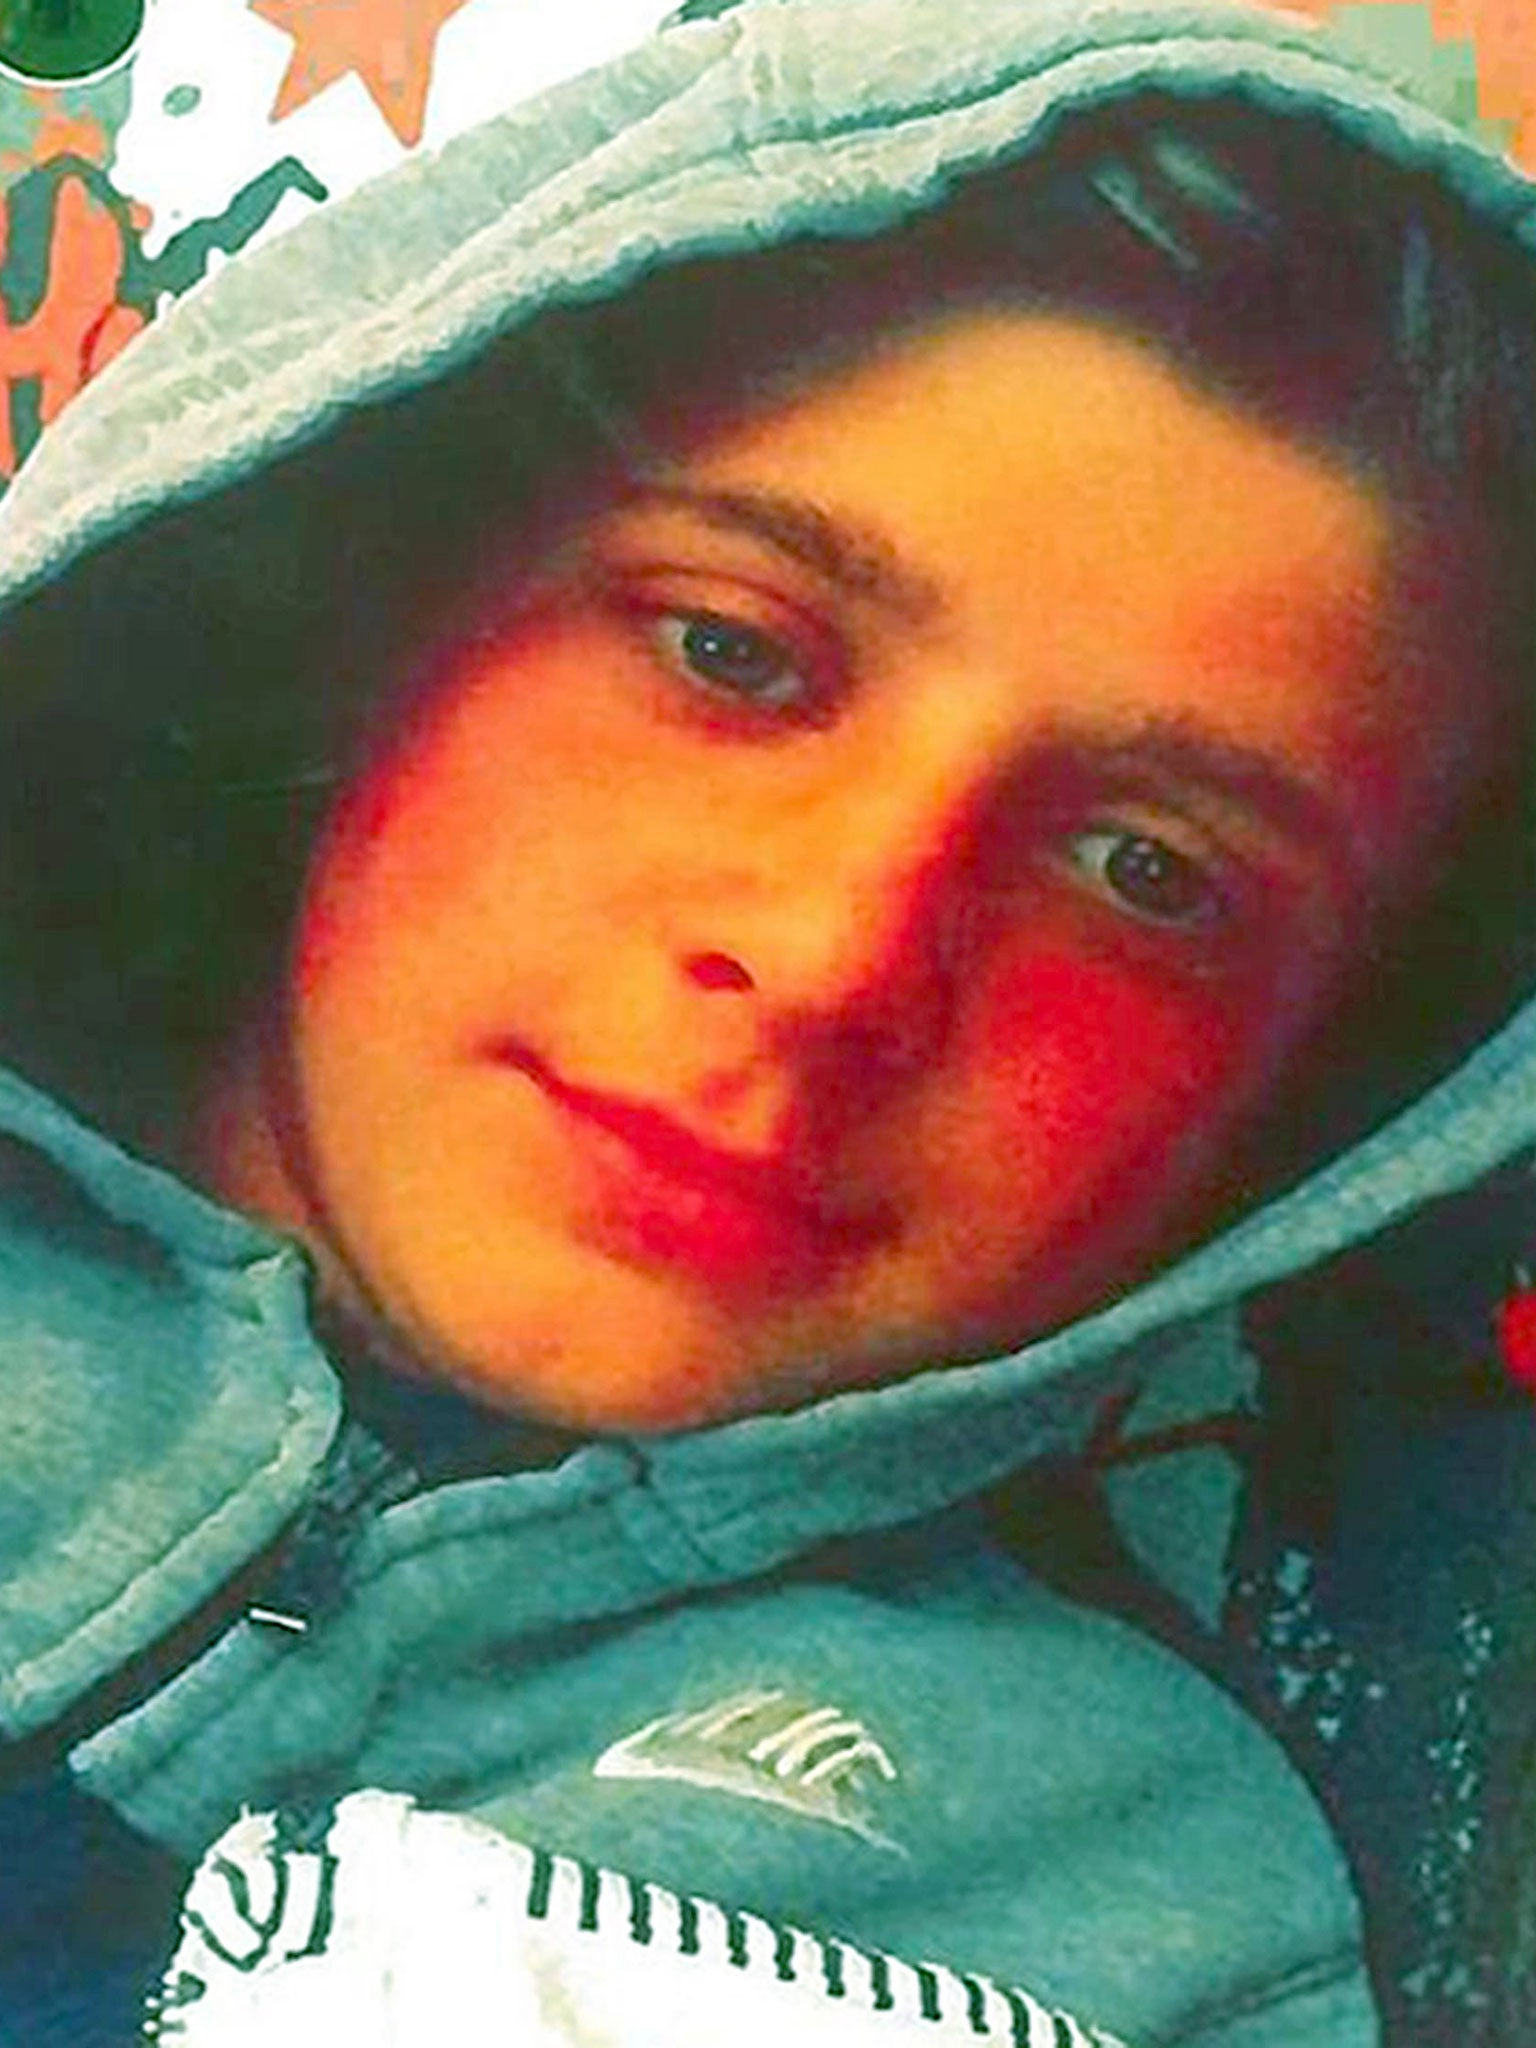 14-year-old Jordan Watson was murdered in a savage and brutal attack